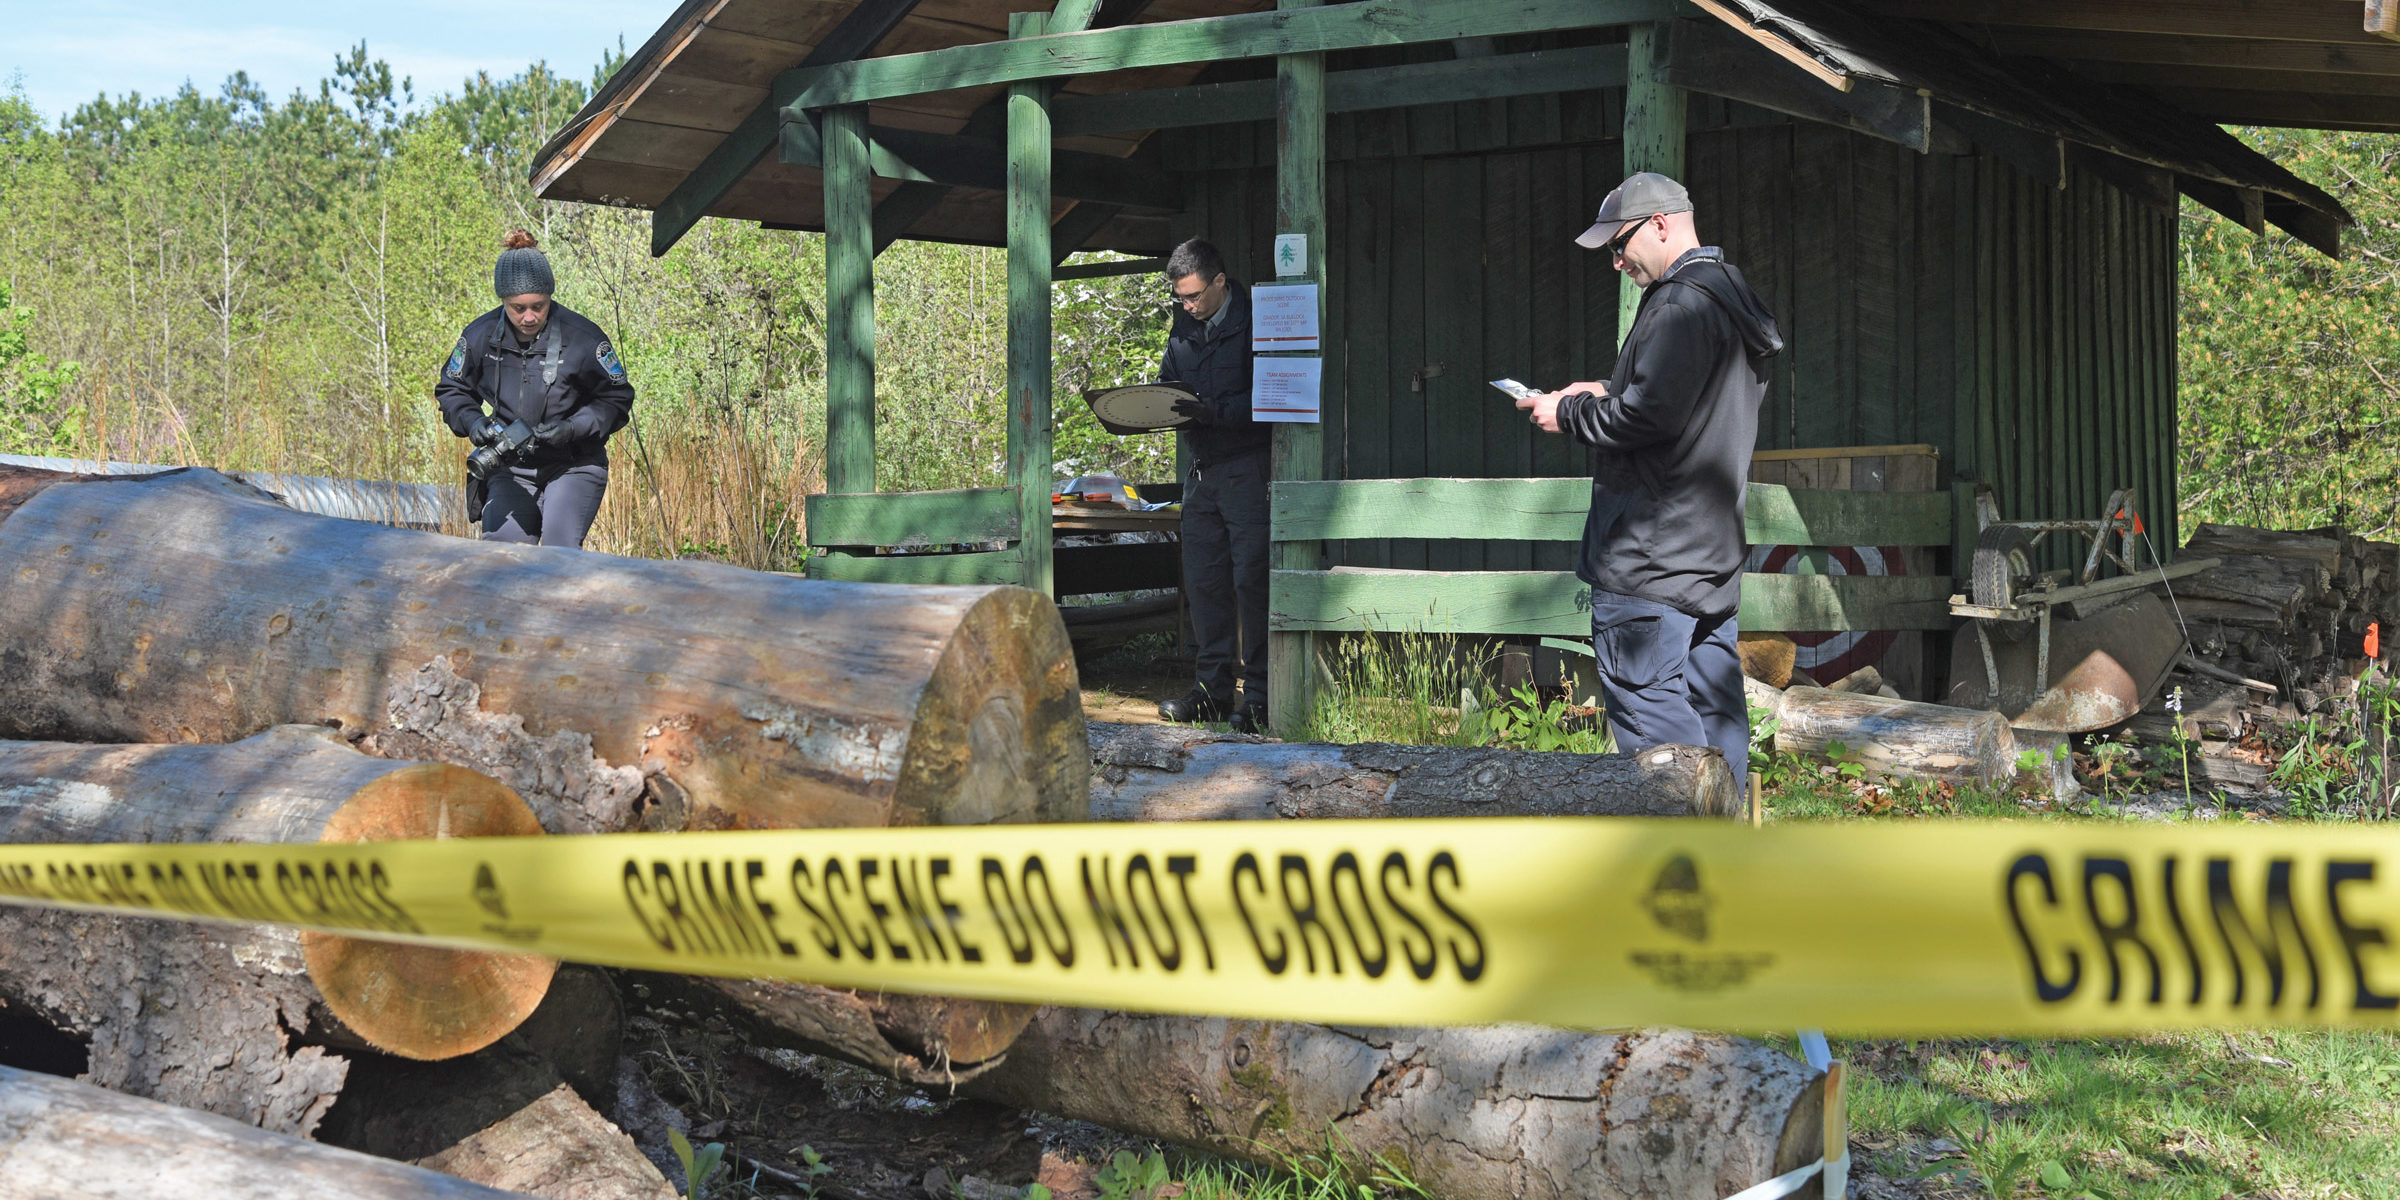 technicians in tactical gear photograph a shed behind yellow crime scene tape